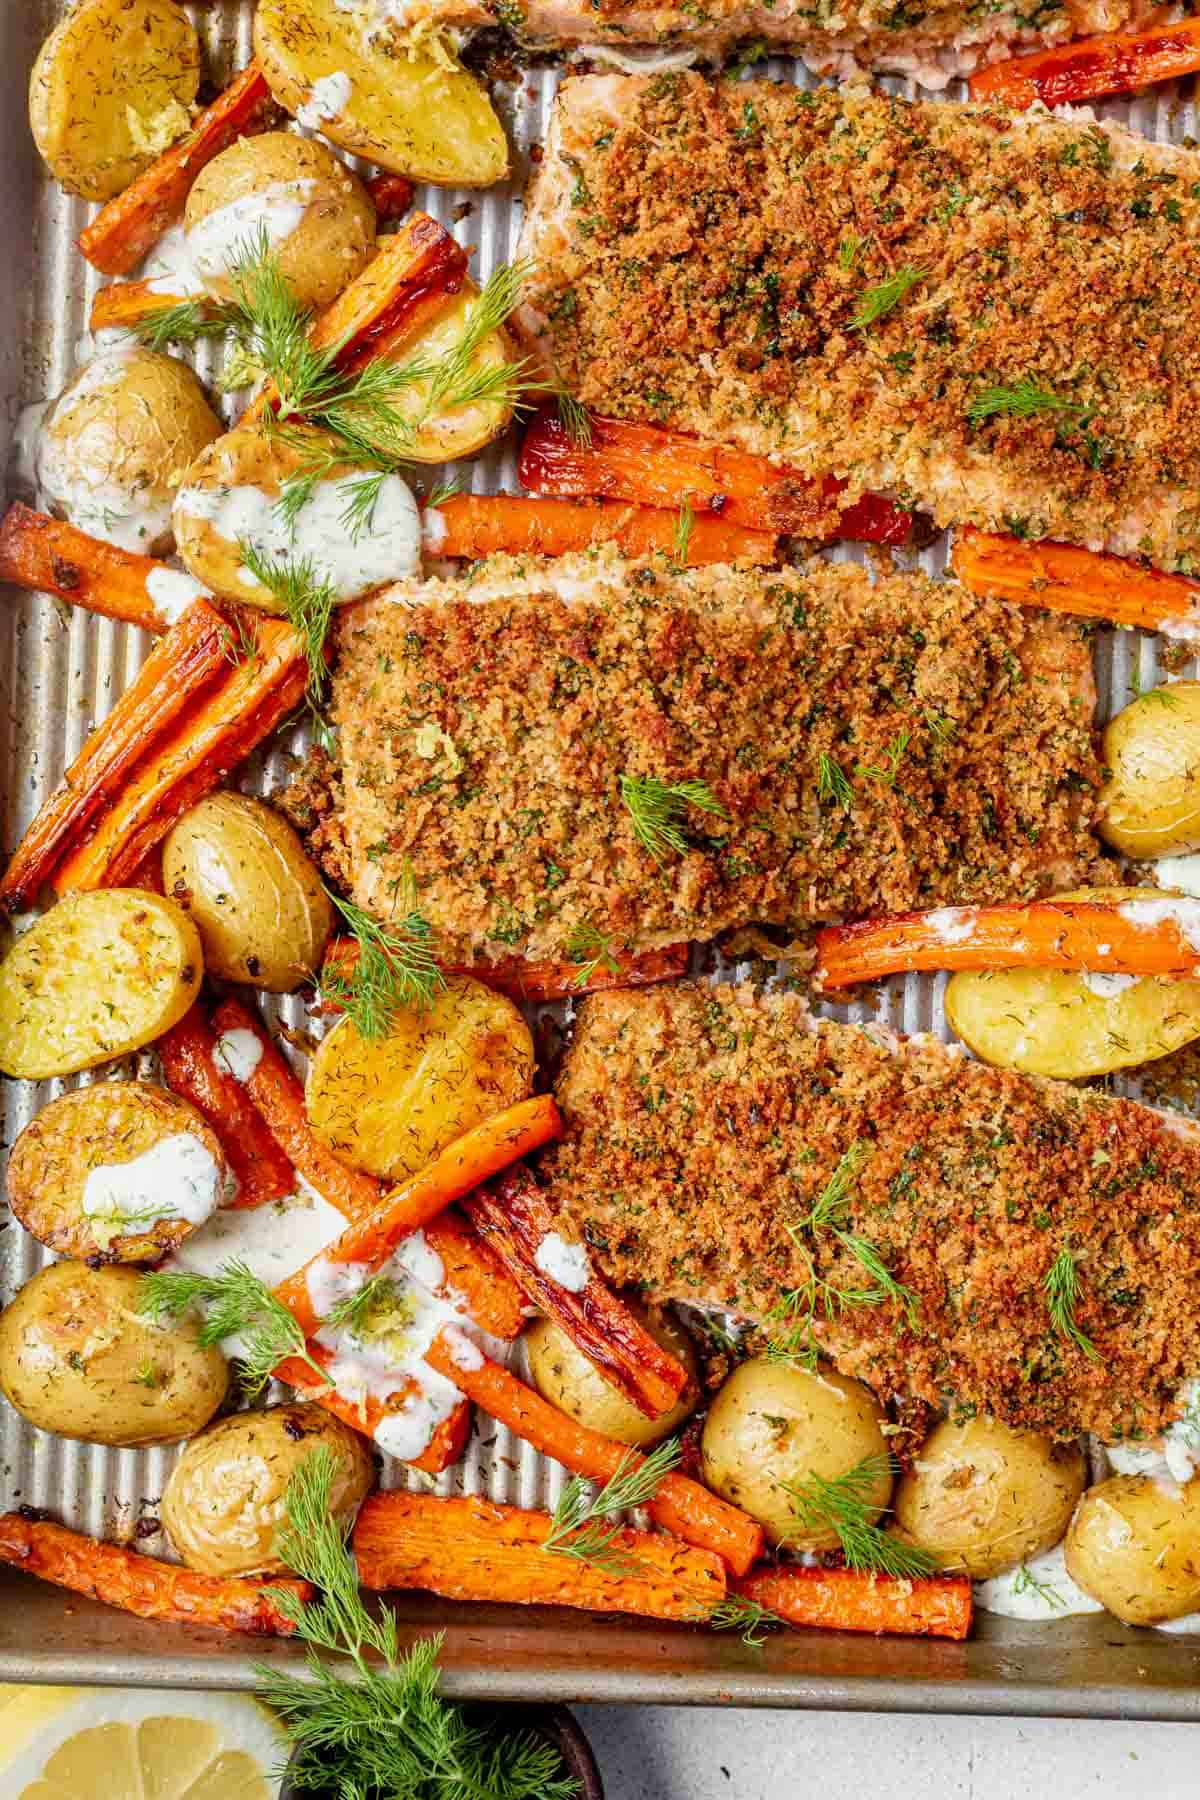 roasted potatoes and carrots with herb crusted salmon